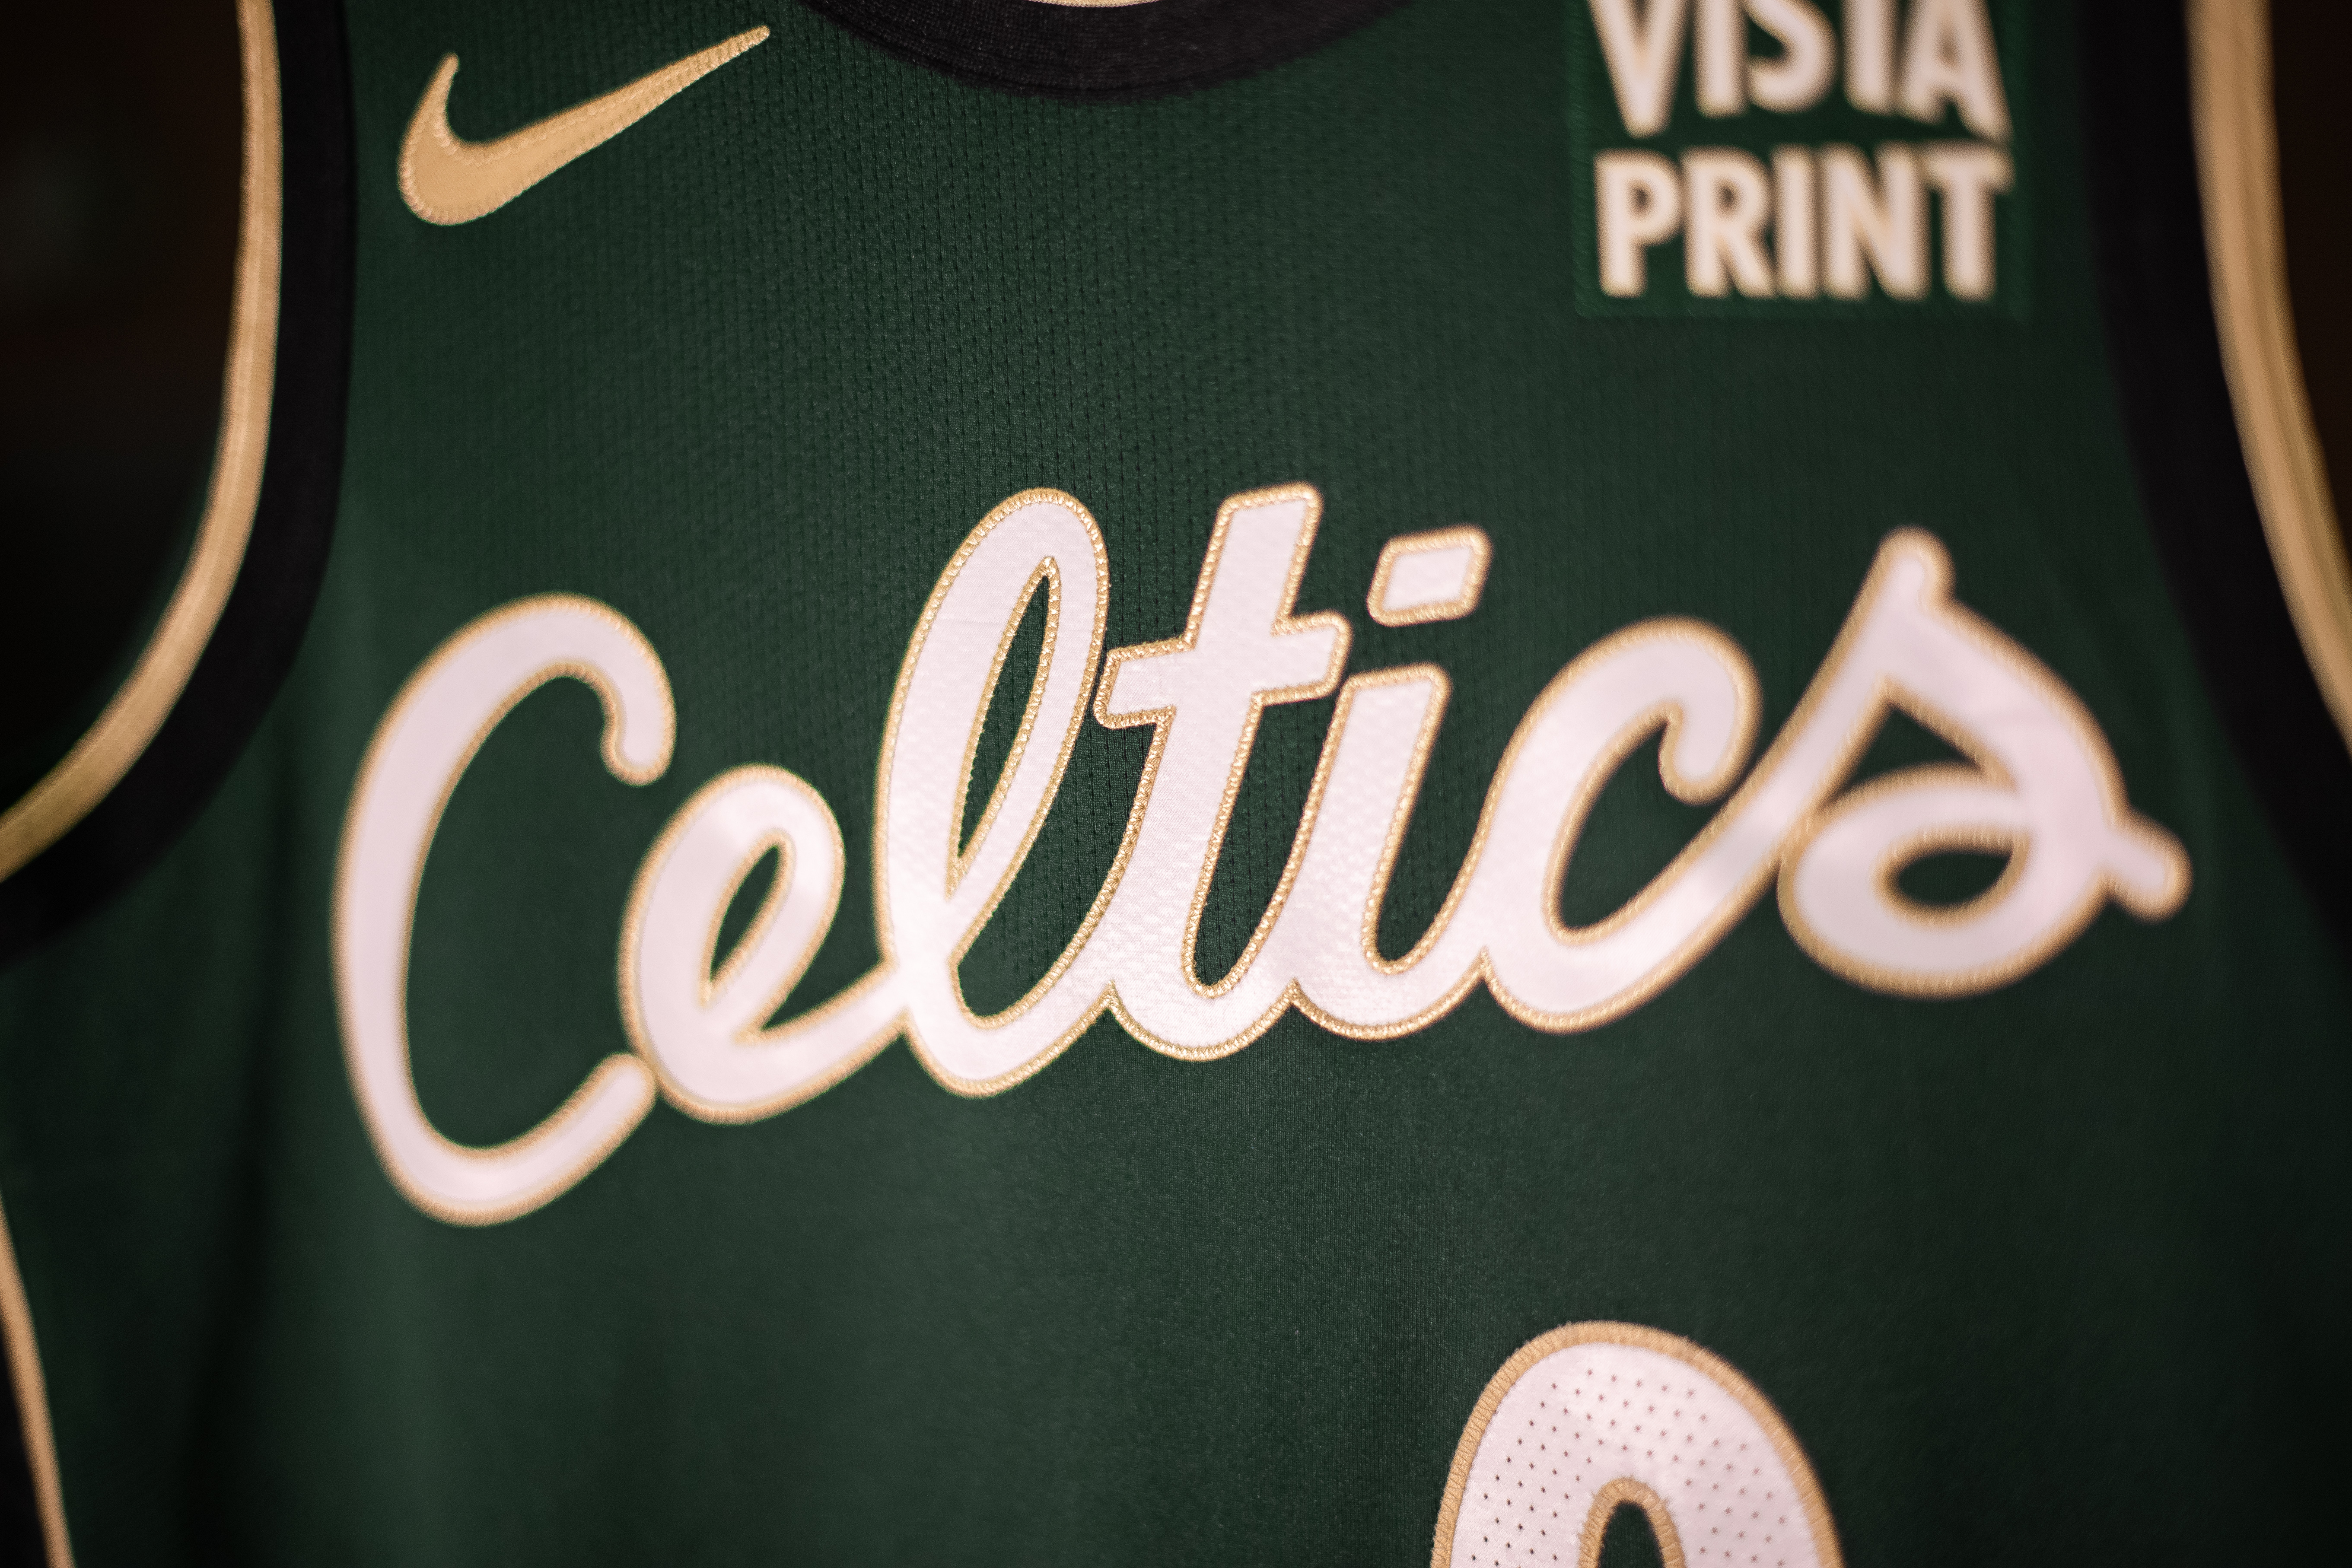 Boston Celtics NBA City Edition jersey, get yours now